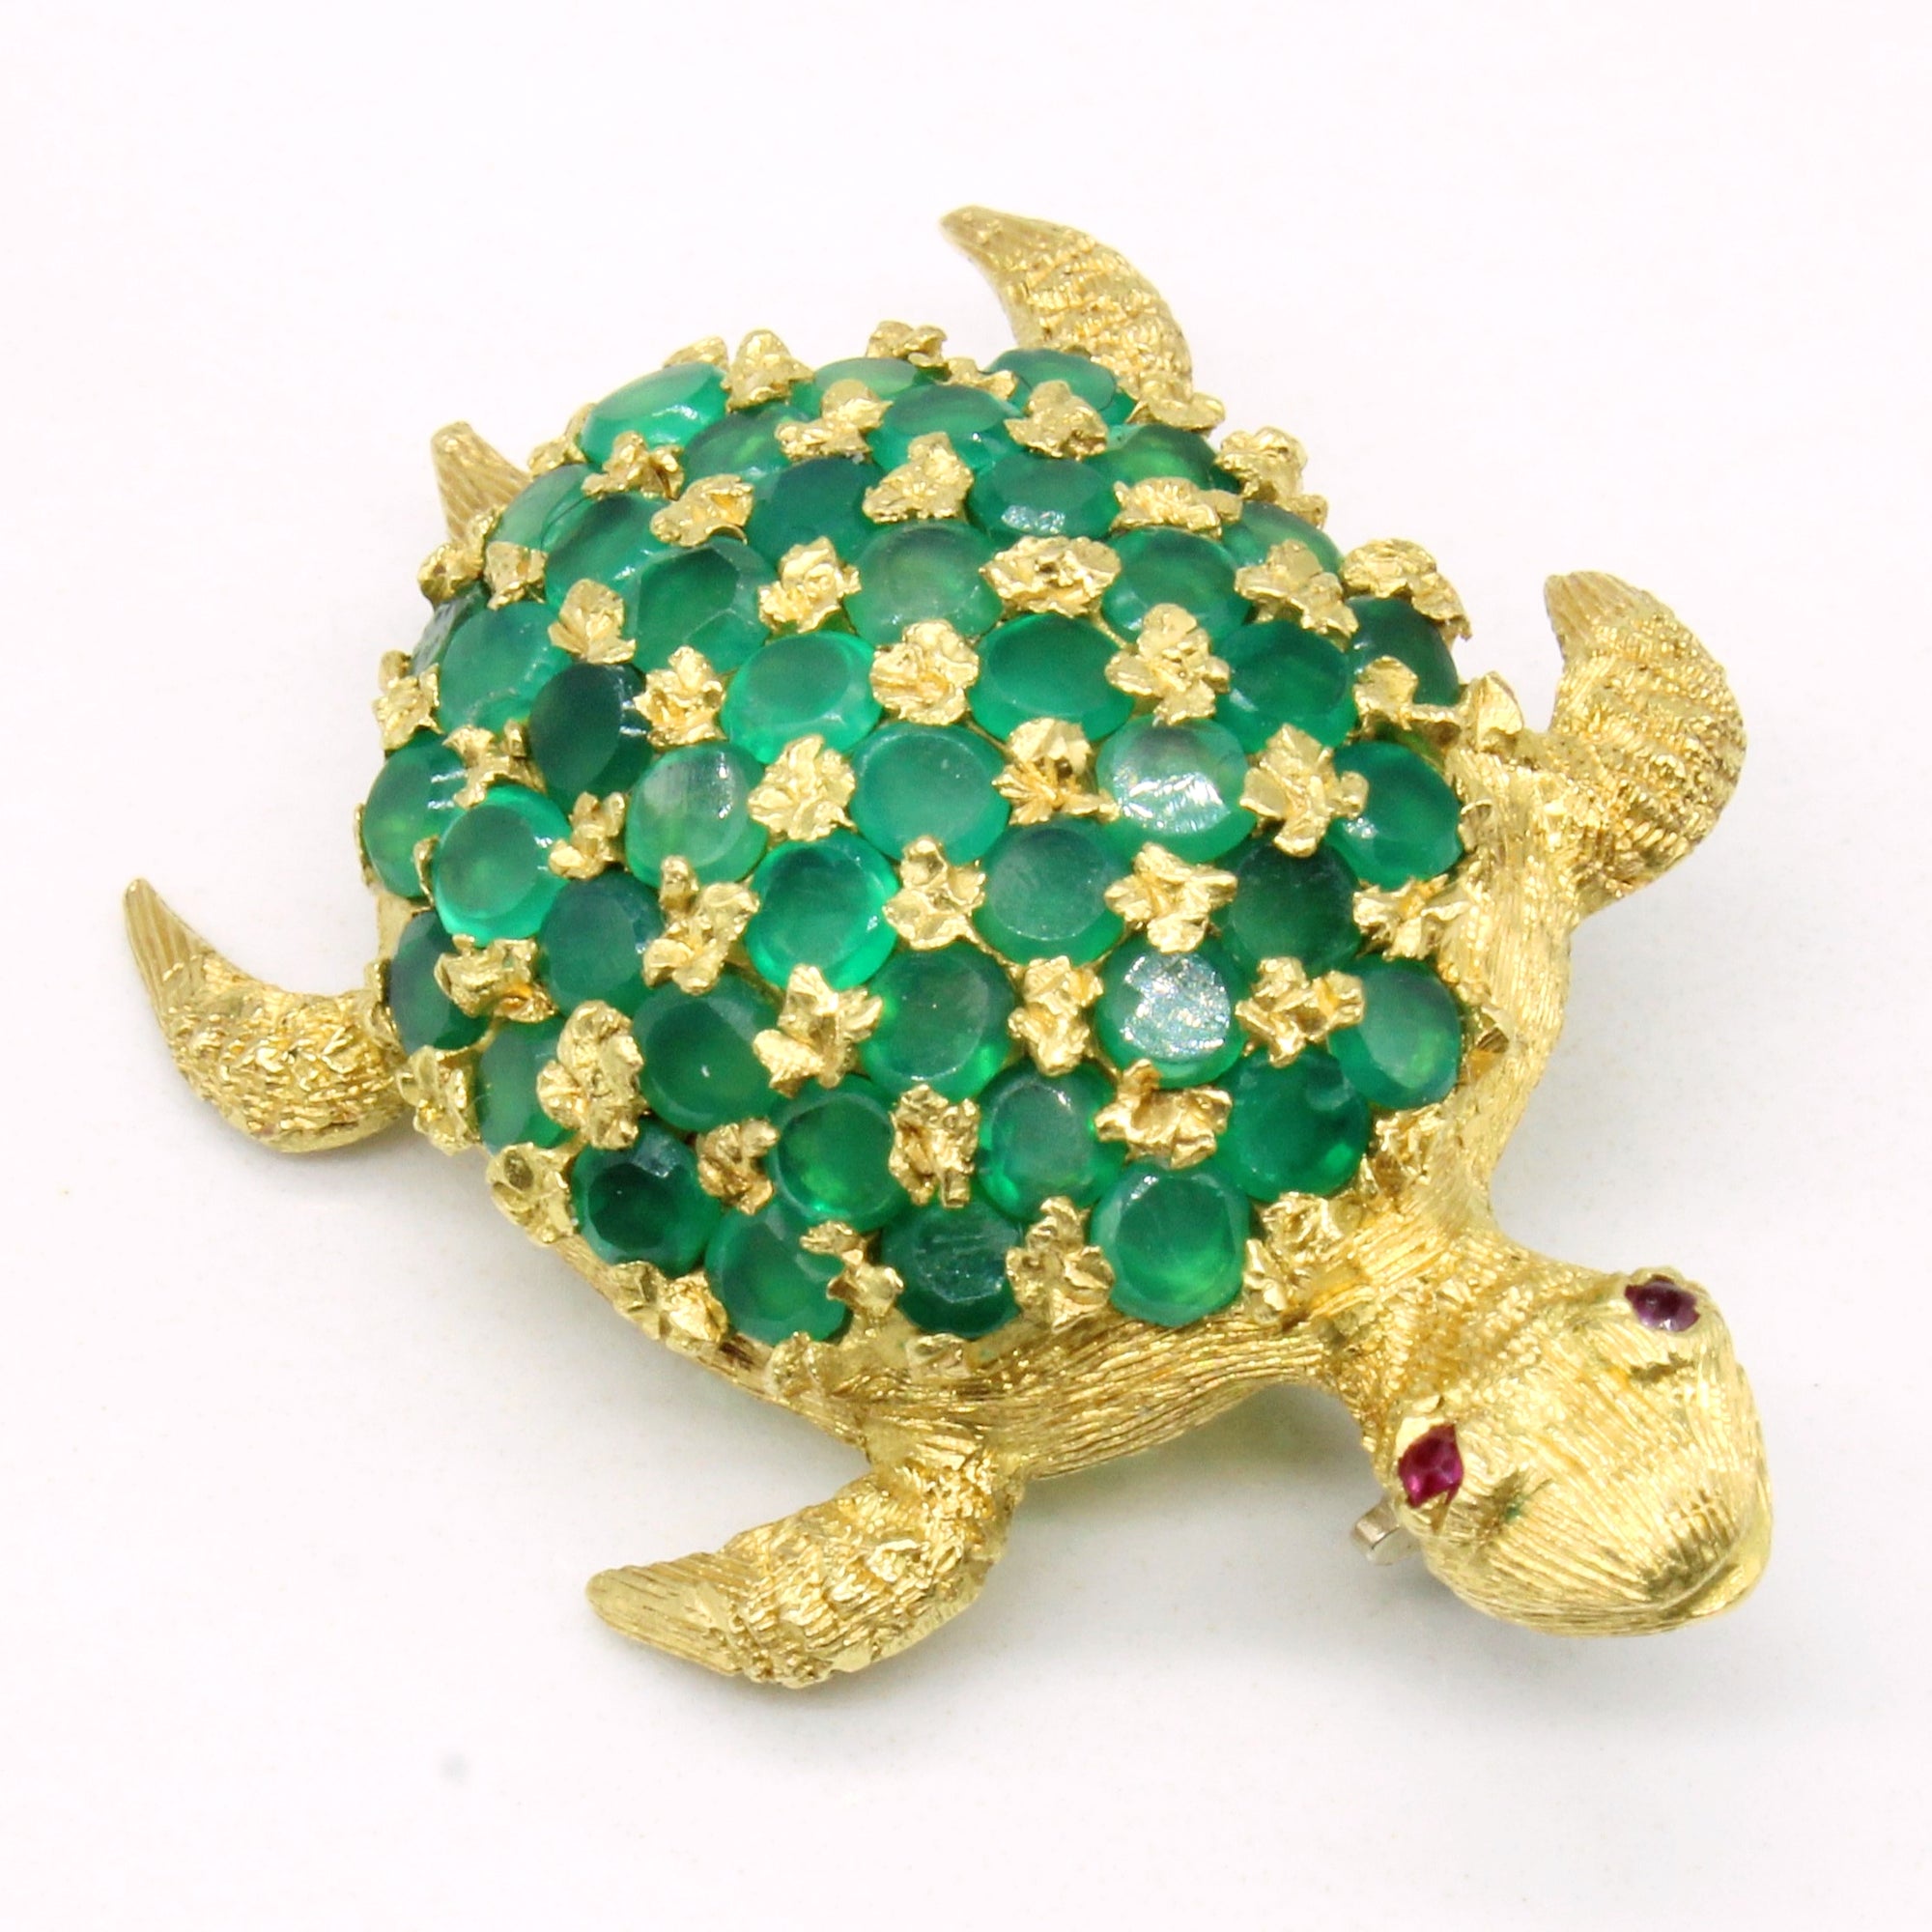 Synthetic Emerald & Ruby Turtle 18k Brooch | 2.64ctw, 0.01ctw |